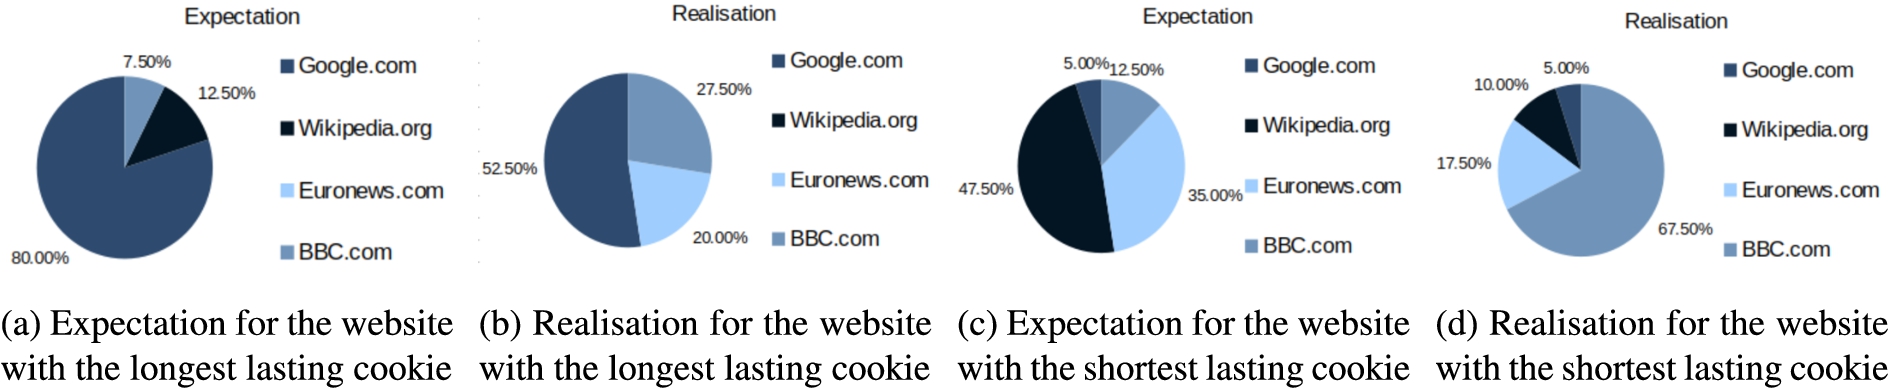 Survey results for the duration of cookies collected by each website.